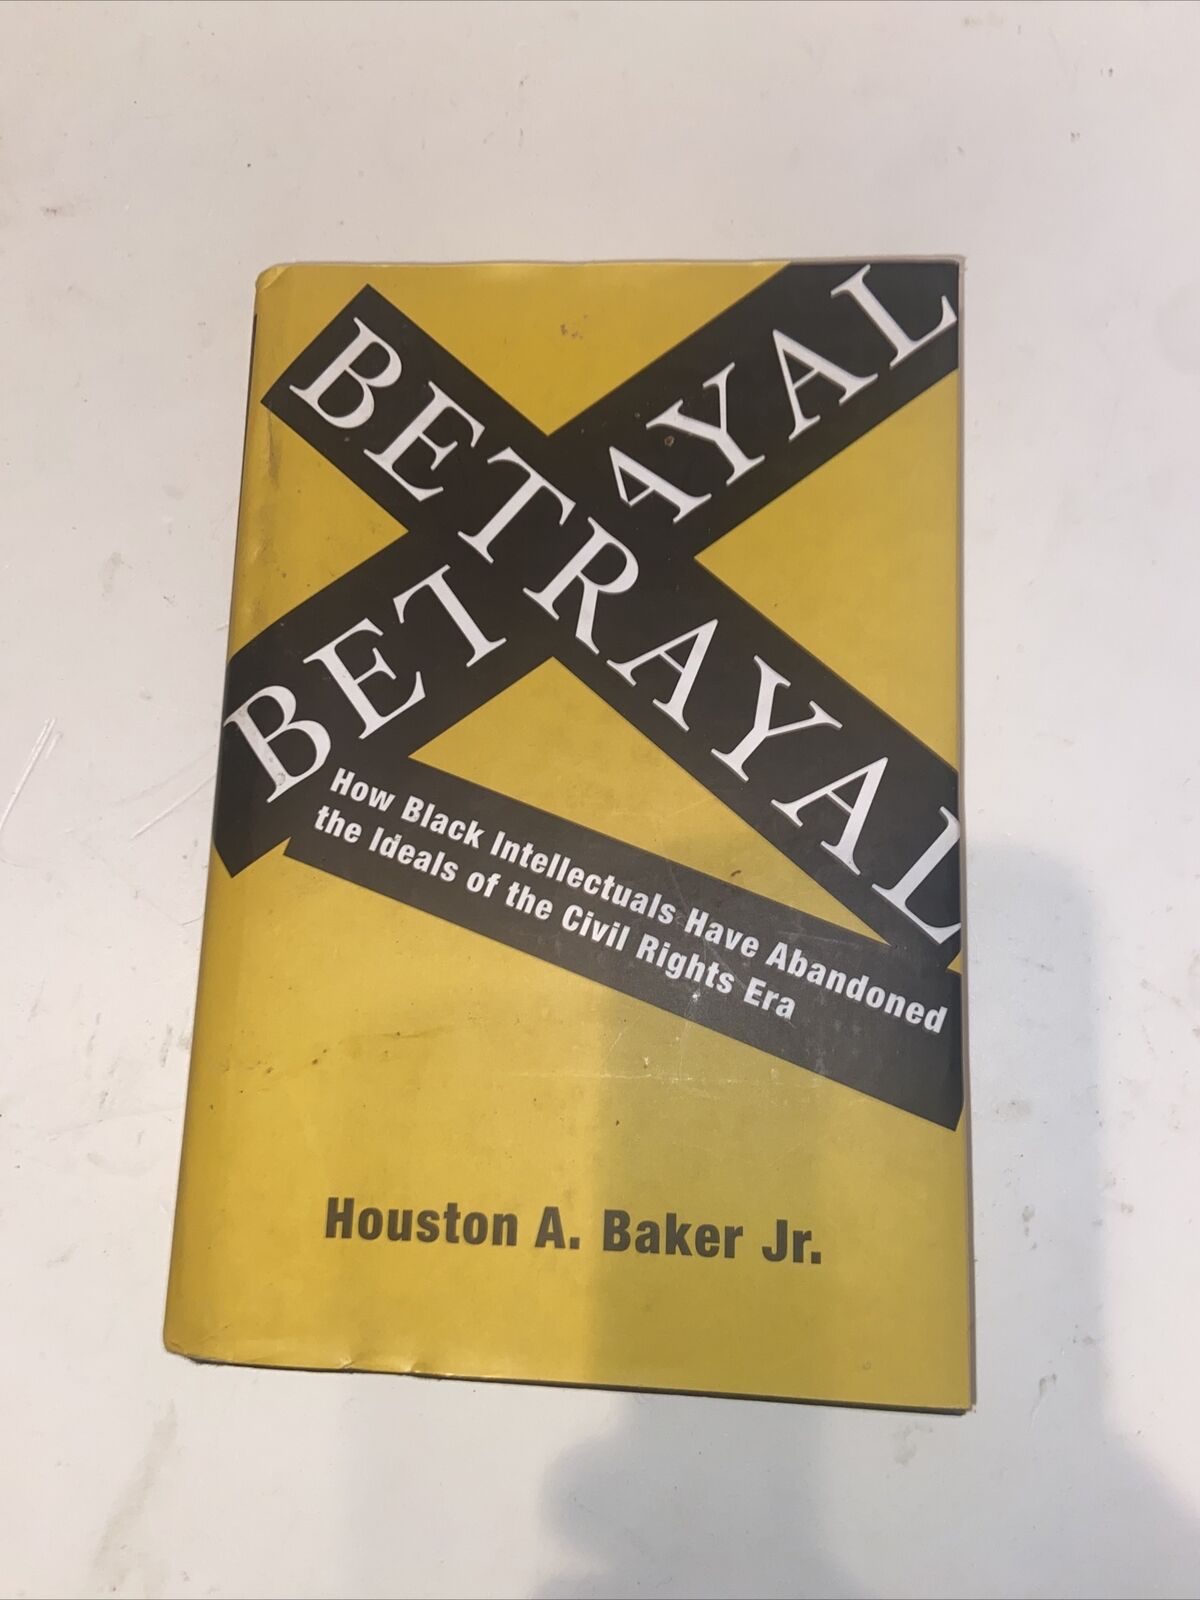 Houston A baker hardcover betrayal how black intellectuals fiction